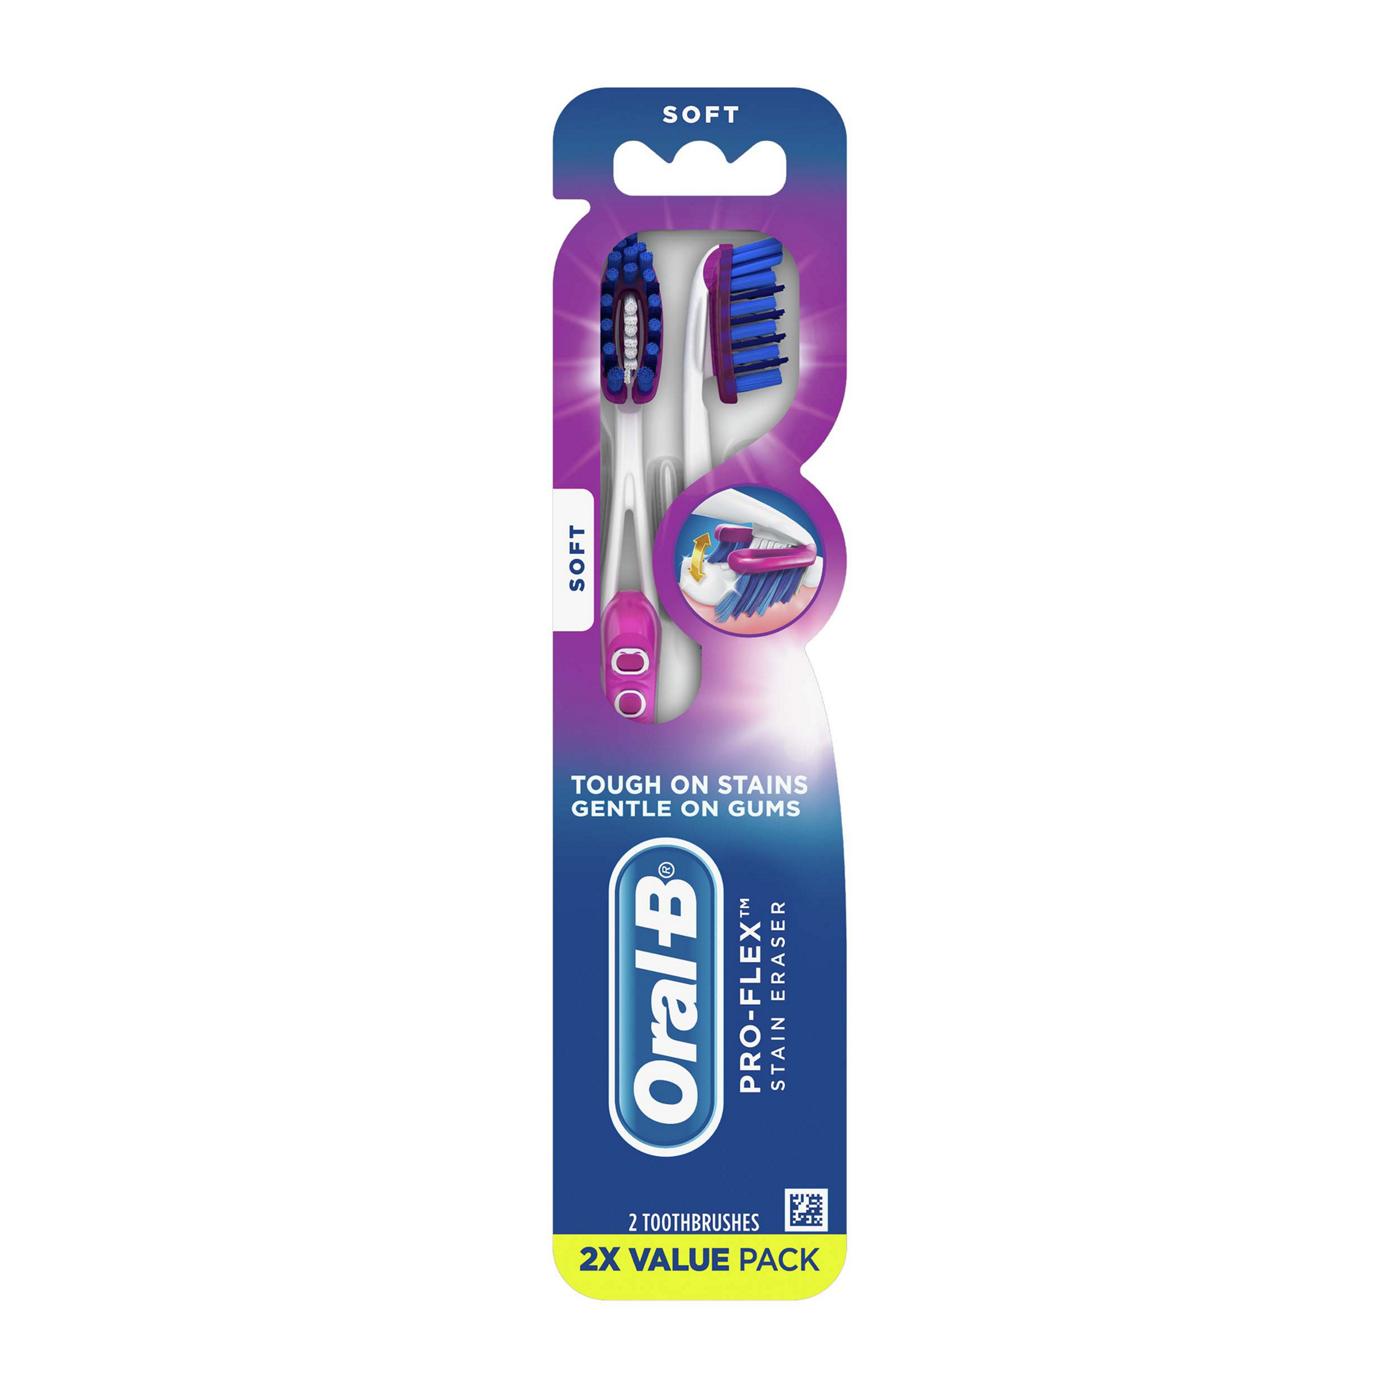 Oral-B Pro-Flex Stain Eraser Toothbrushes - Soft; image 1 of 9